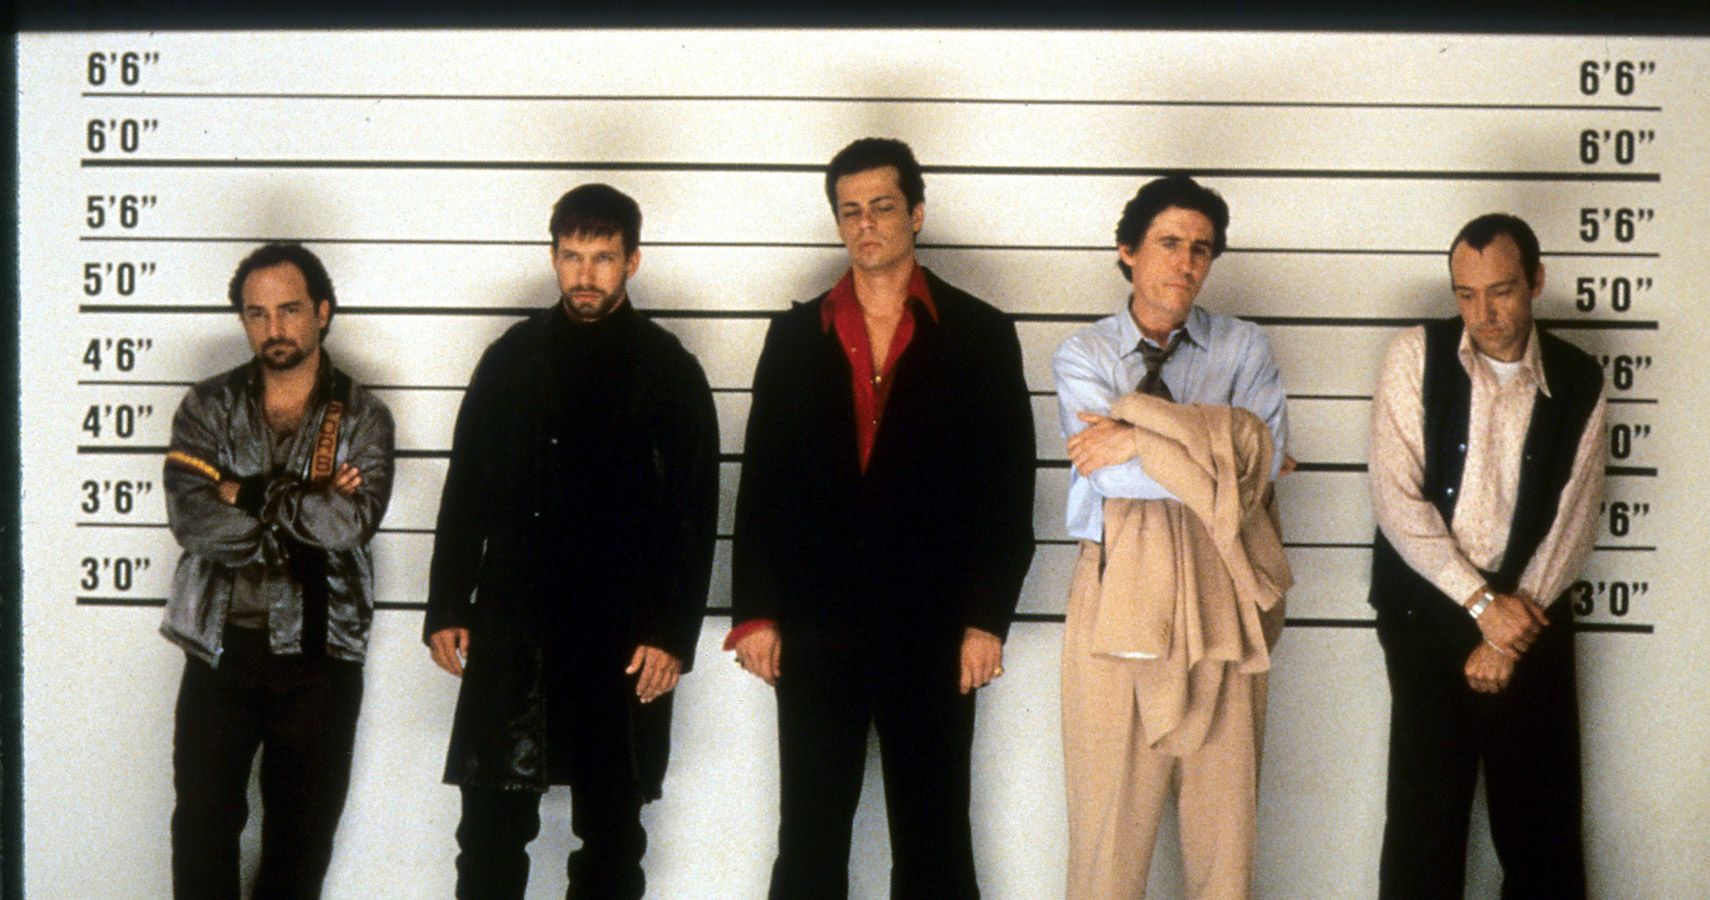 Top 11 Quotes About Keyser Soze: Famous Quotes & Sayings About